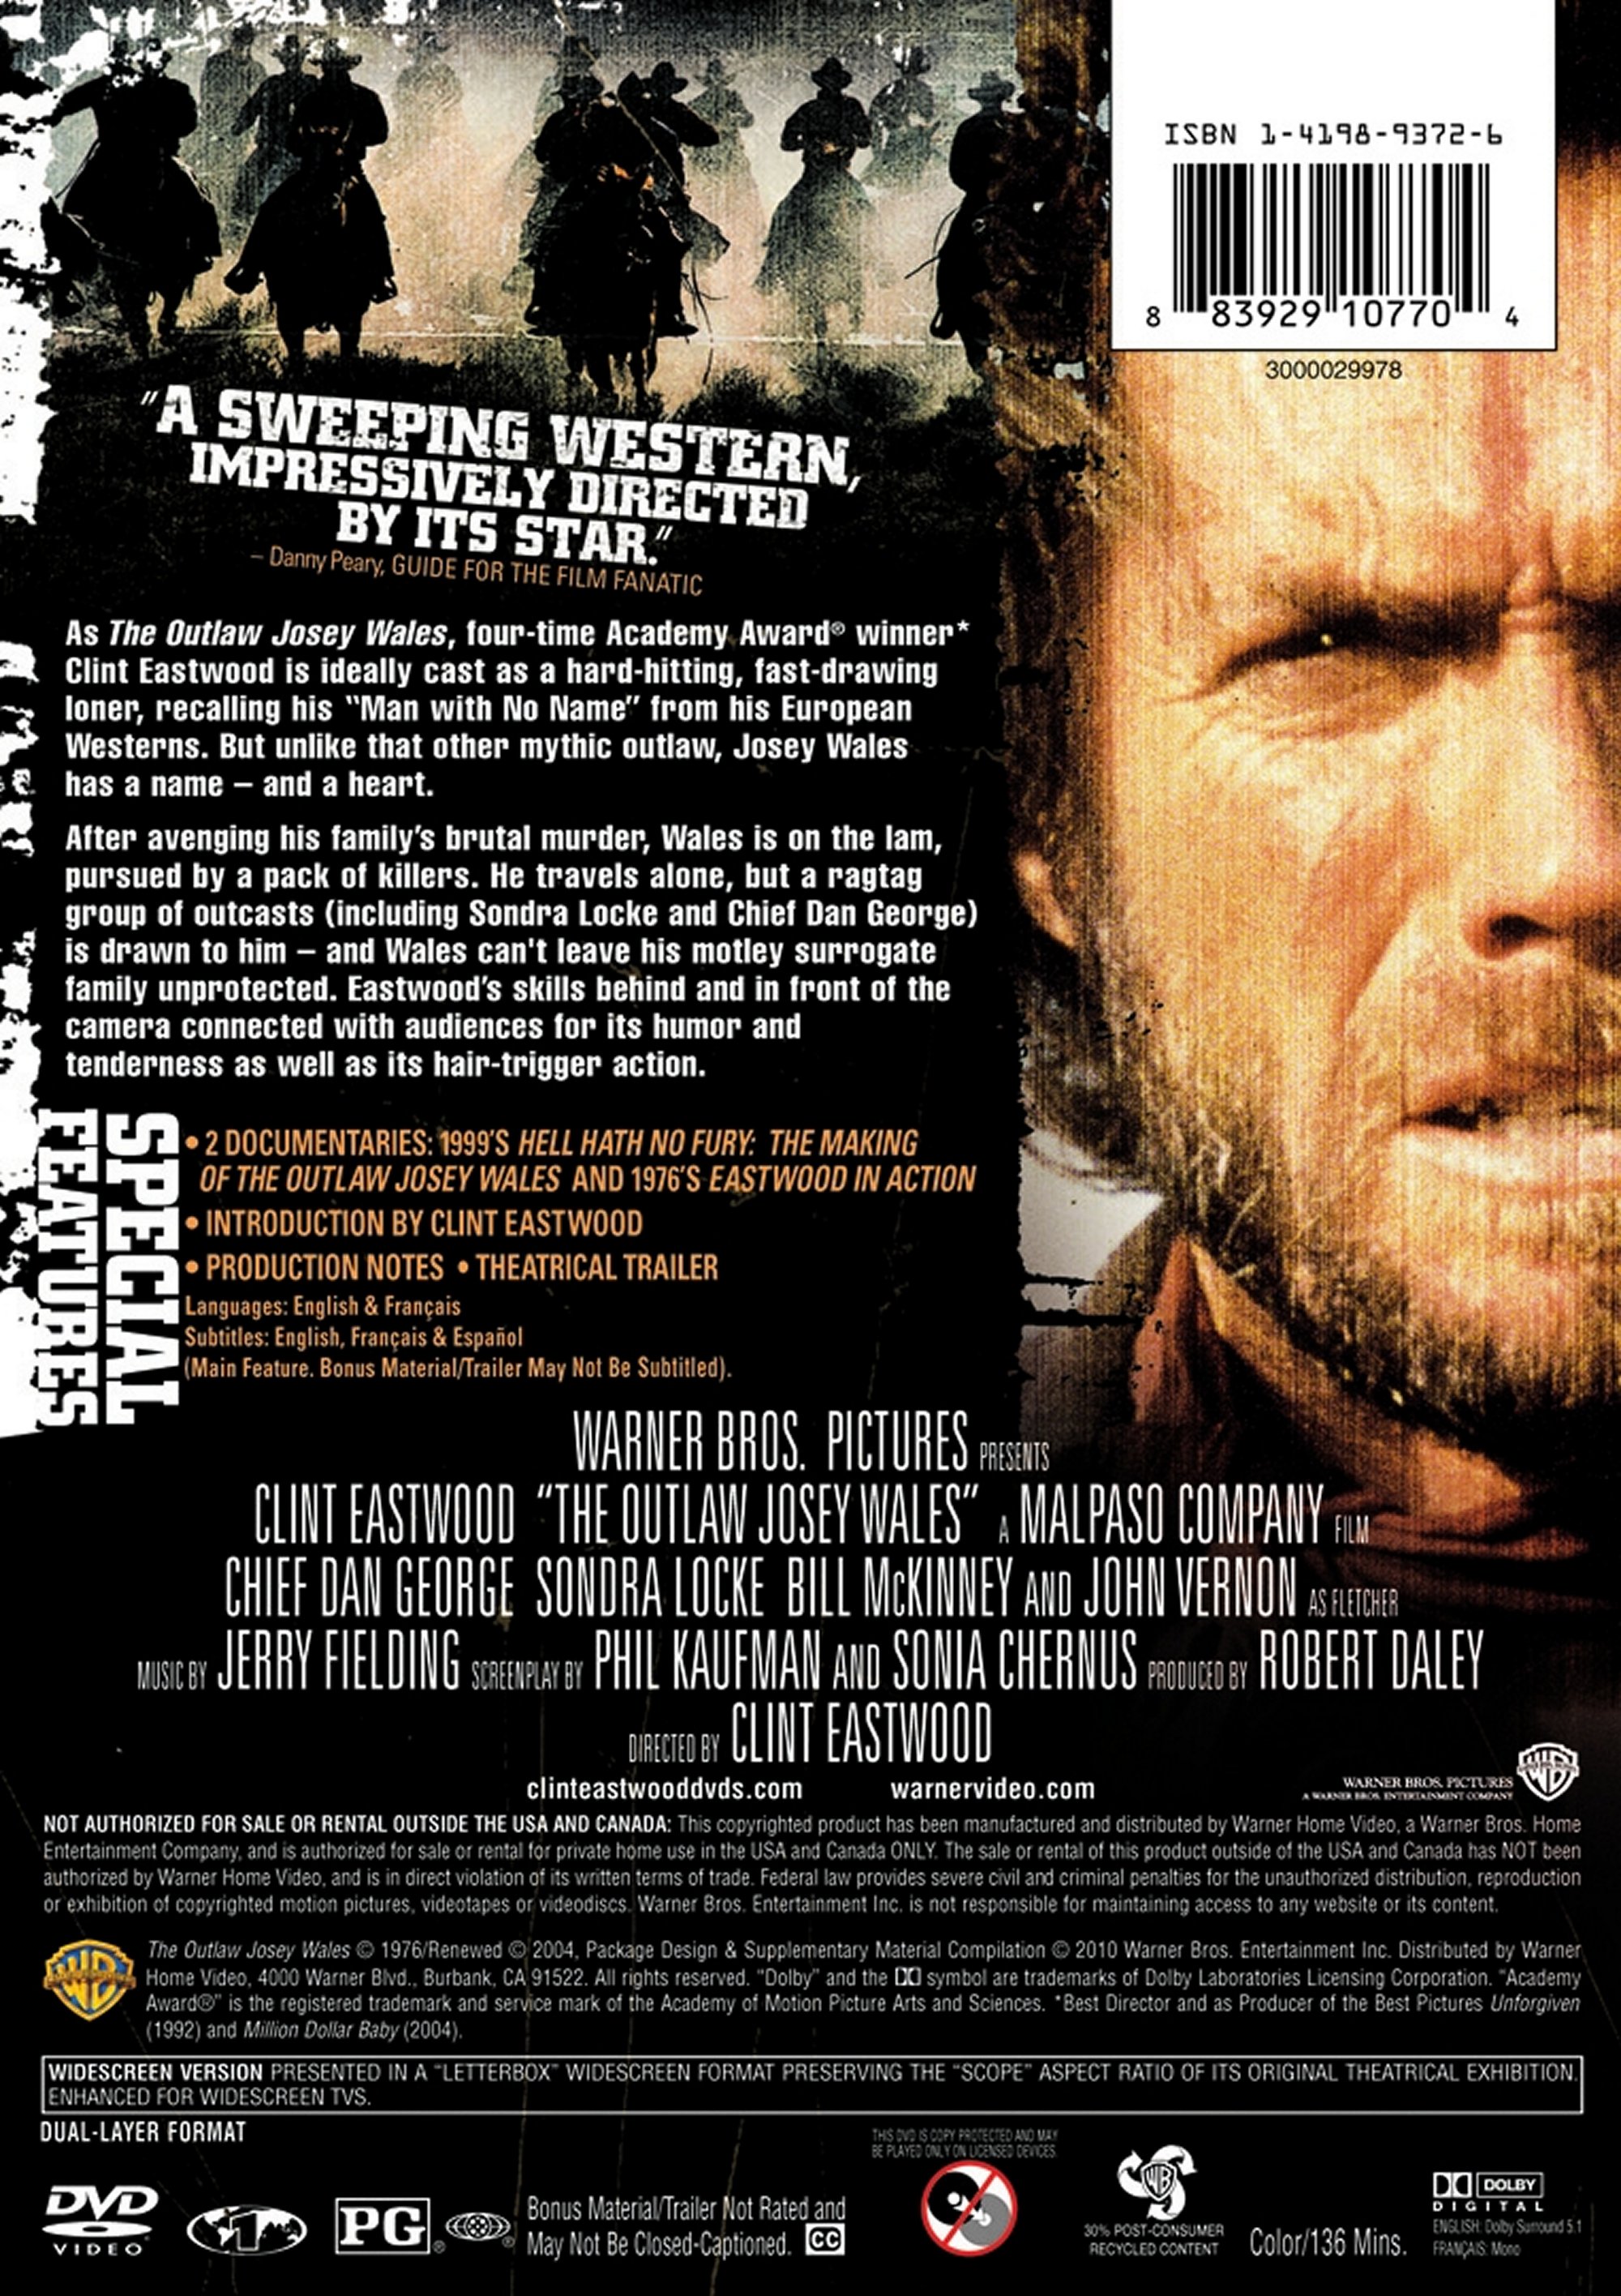 The Outlaw Josey Wales (DVD), Warner Home Video, Western - image 2 of 4